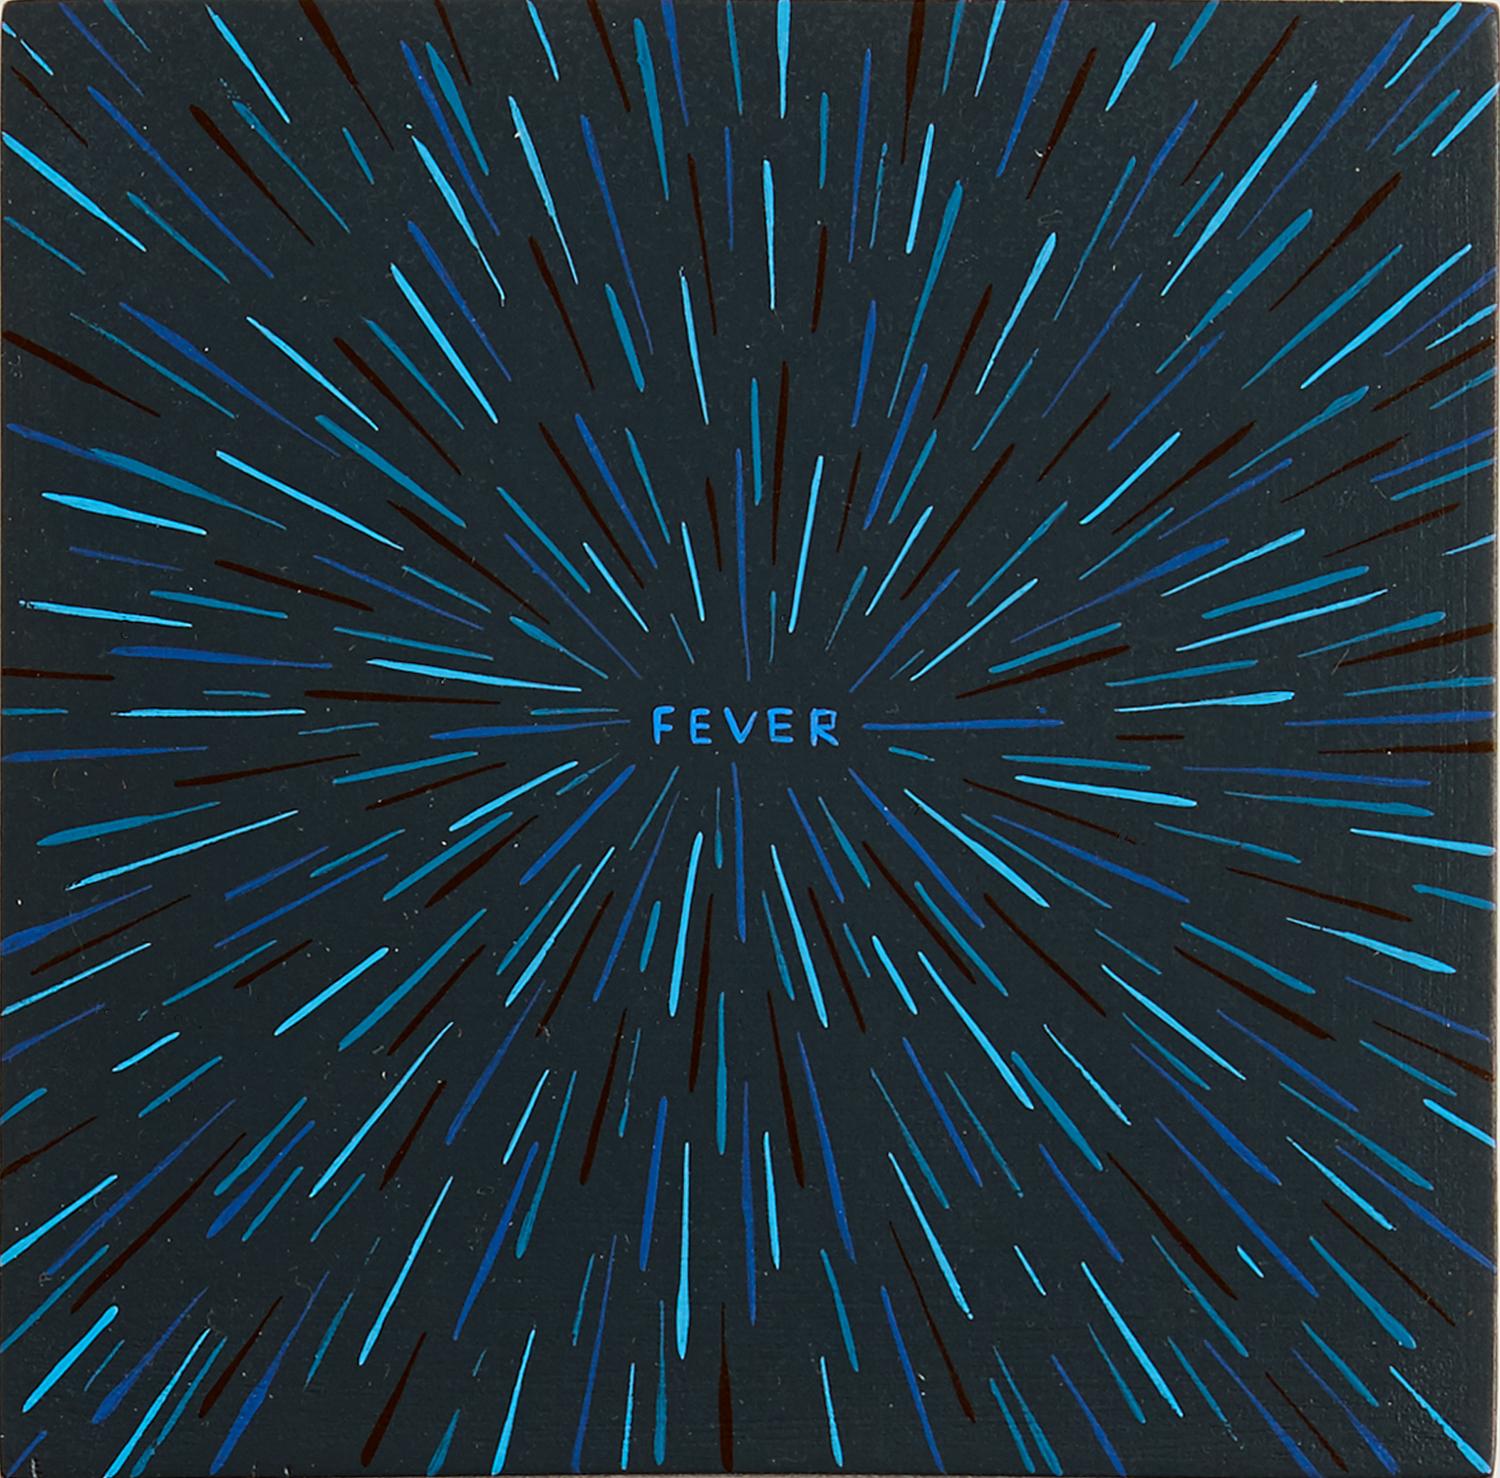 Abstract Drawing Jim Houser - FEVER (FEVER)